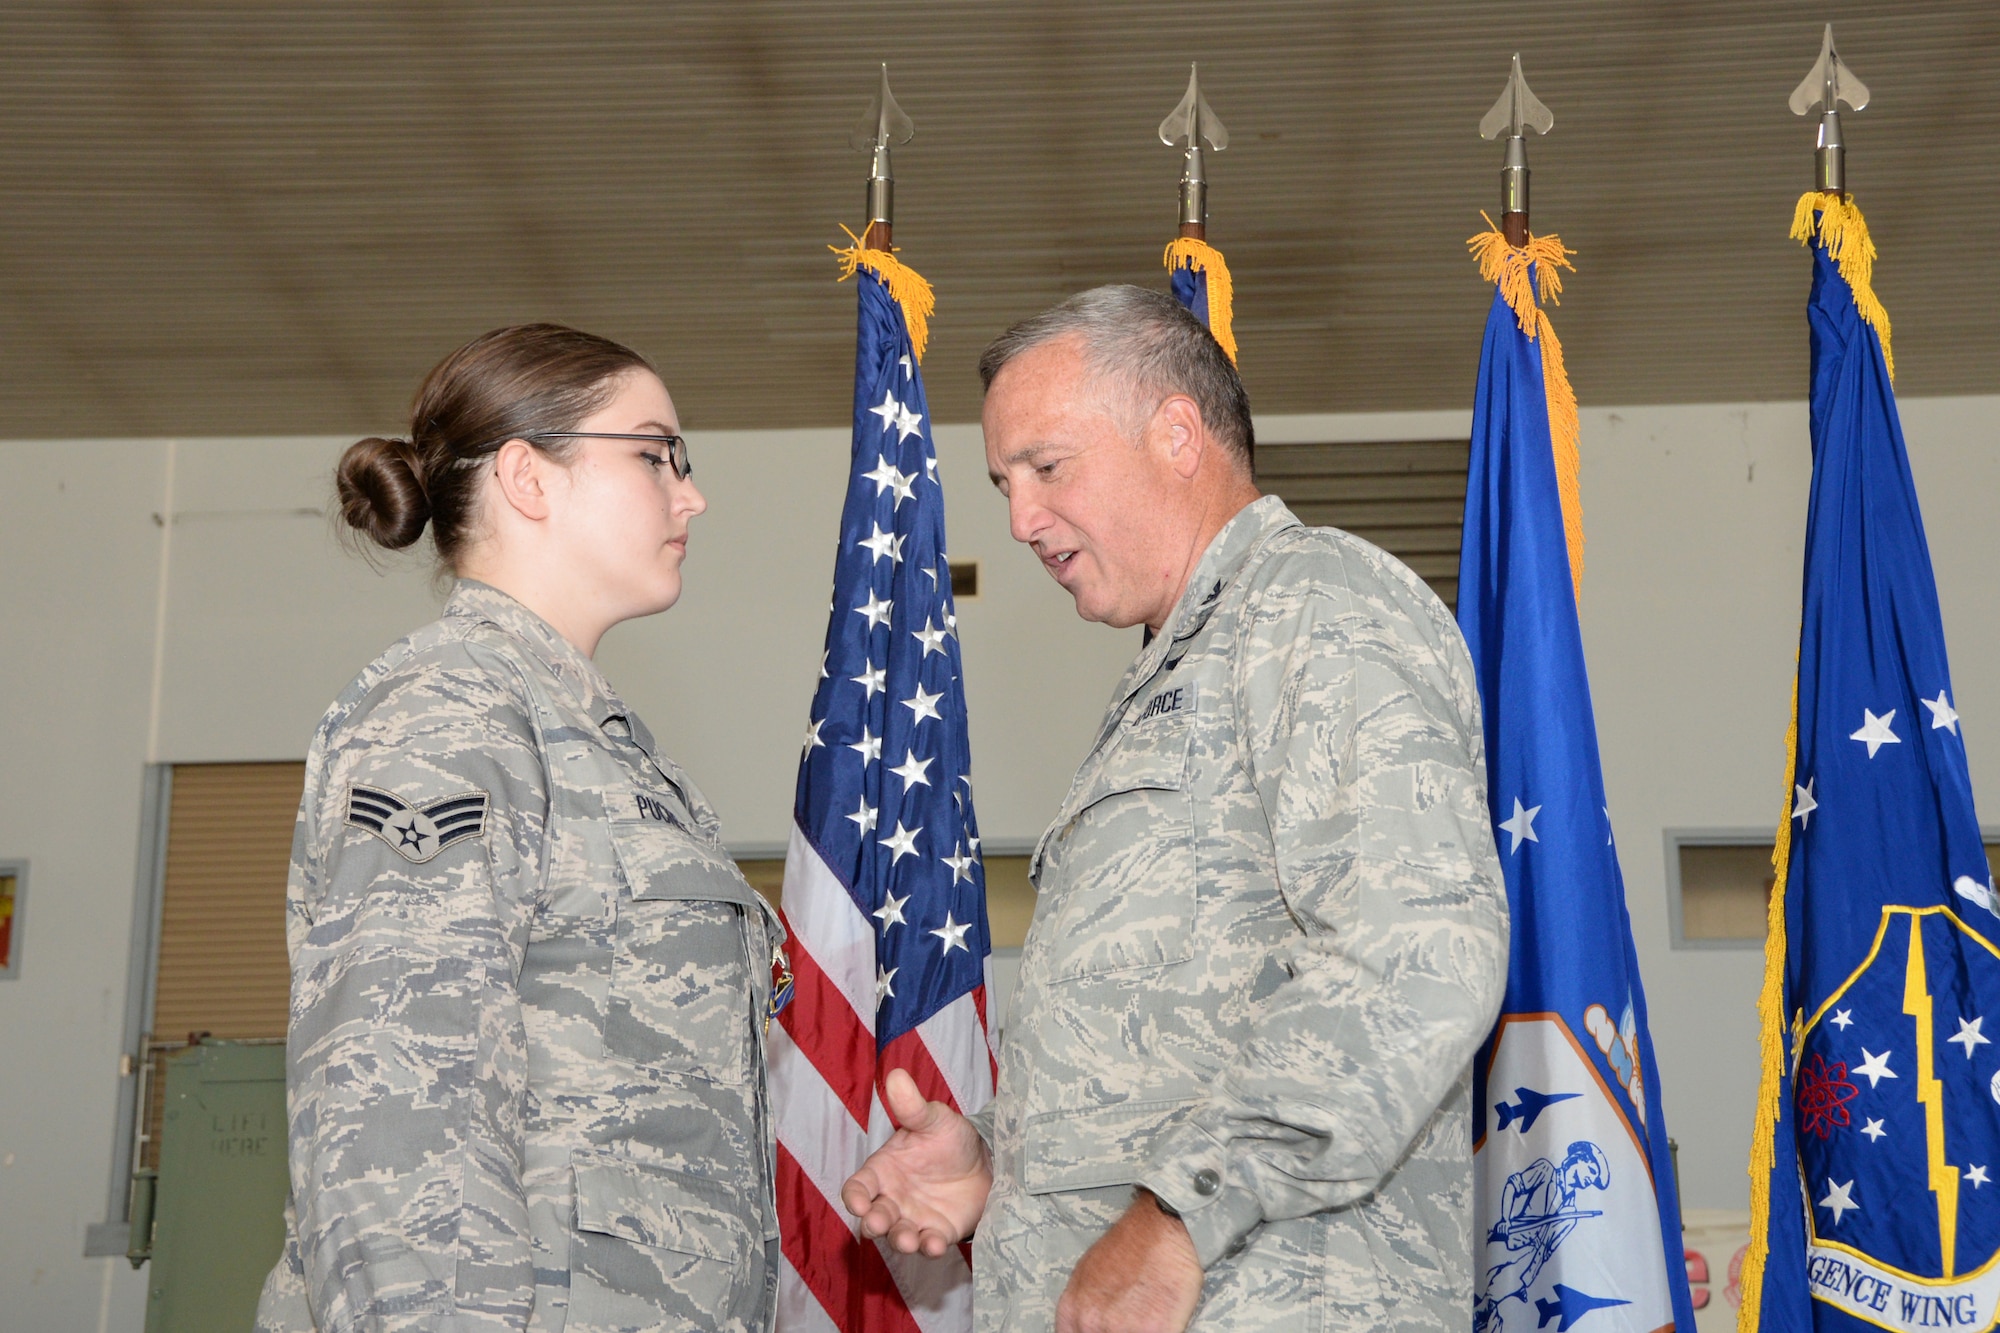 U.S. Air Force Colonel L. Kip Clark, right, the commander of the 181st Intelligence Wing presents Senior Airman Leah Puckett, left, with the Indiana Distinguished Service Cross, November 8, 2015. (U.S. Air National Guard photo by Airman 1st Class Lonnie Wiram)